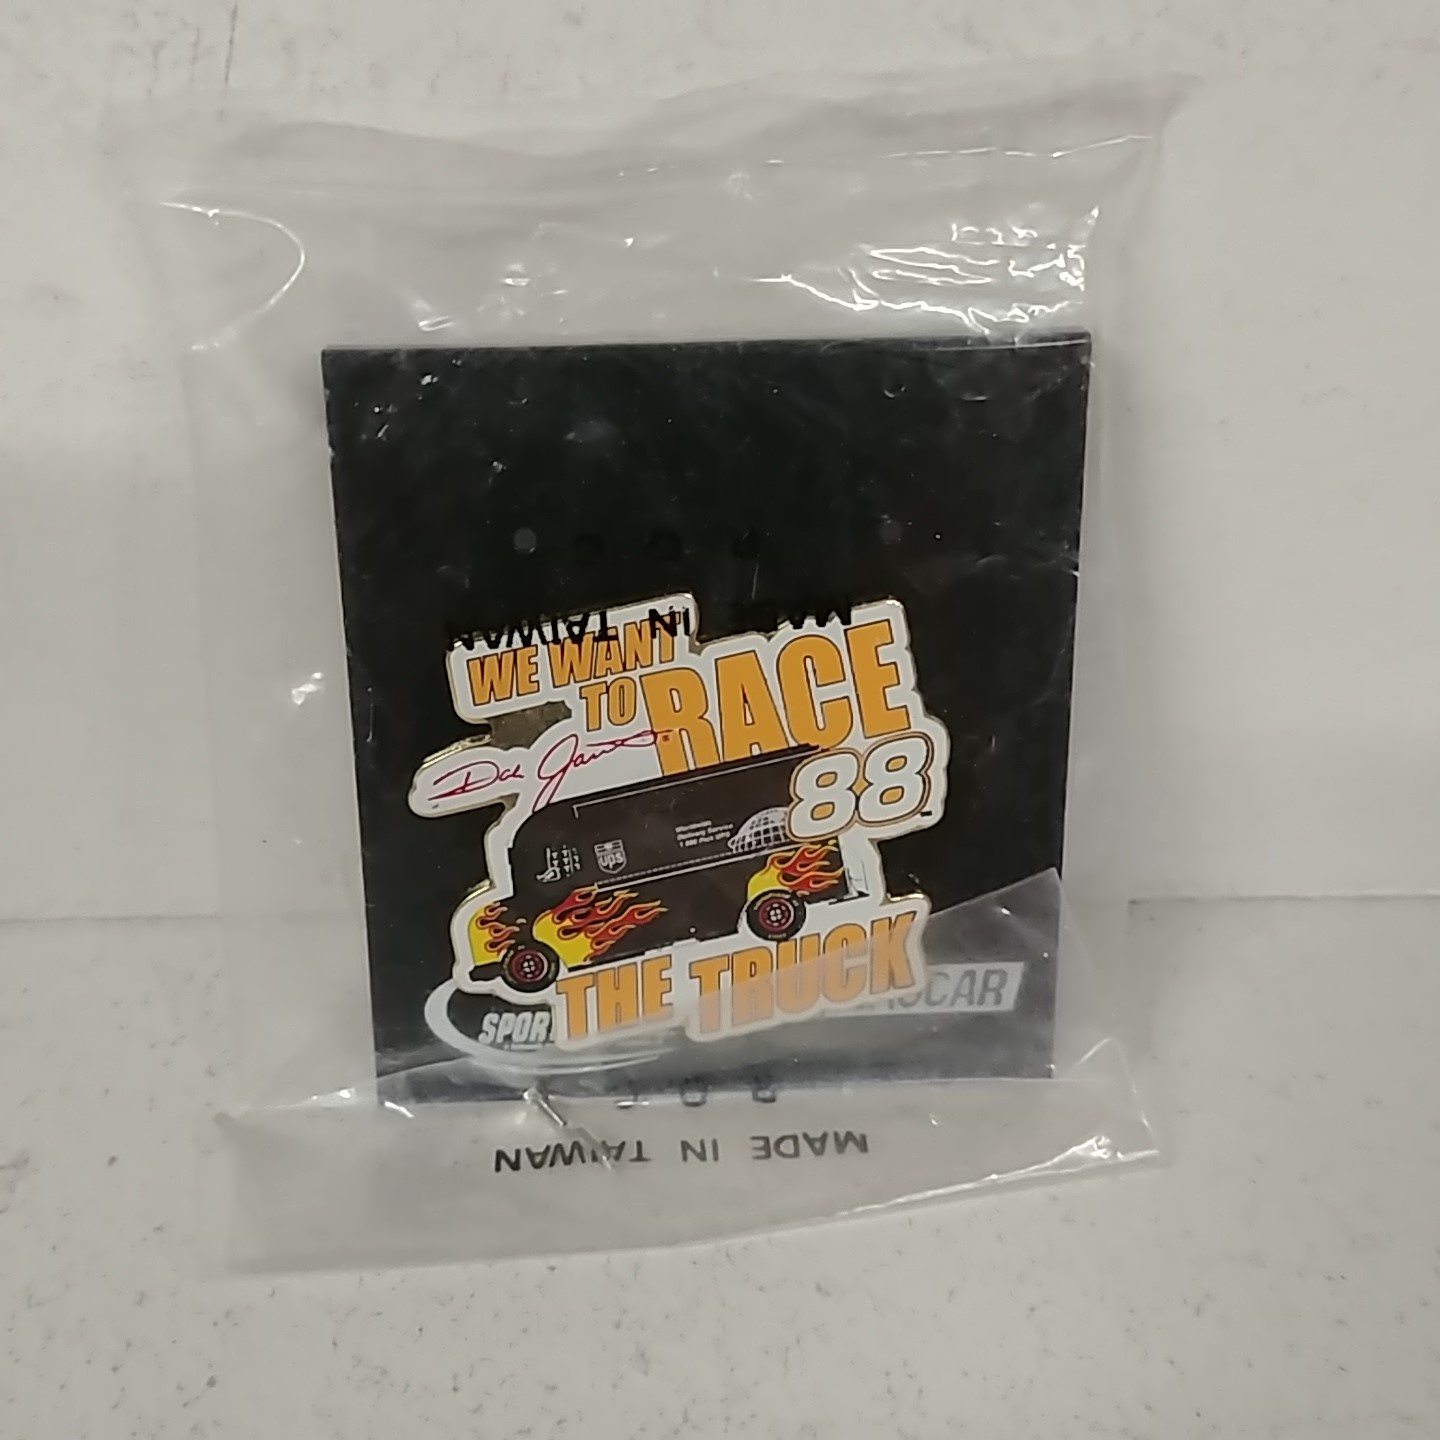 2001 Dale Jarrett UPS "We Want to Race the Truck" hatpin